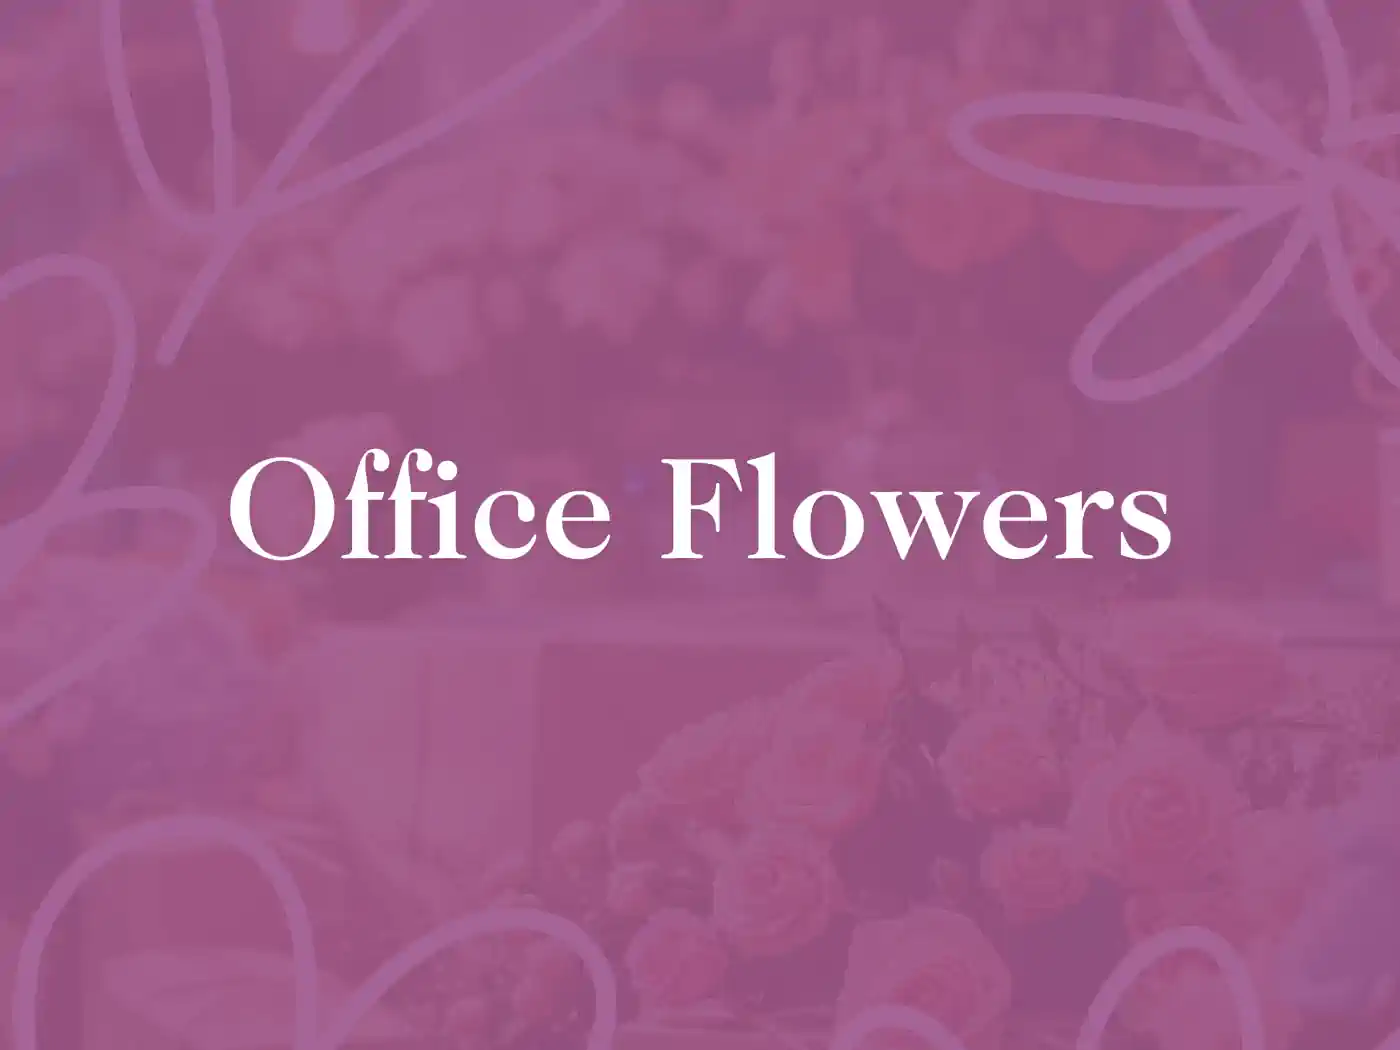 Office Flowers text over a background of pink floral arrangements. Fabulous Flowers and Gifts - Office Flowers Collection.